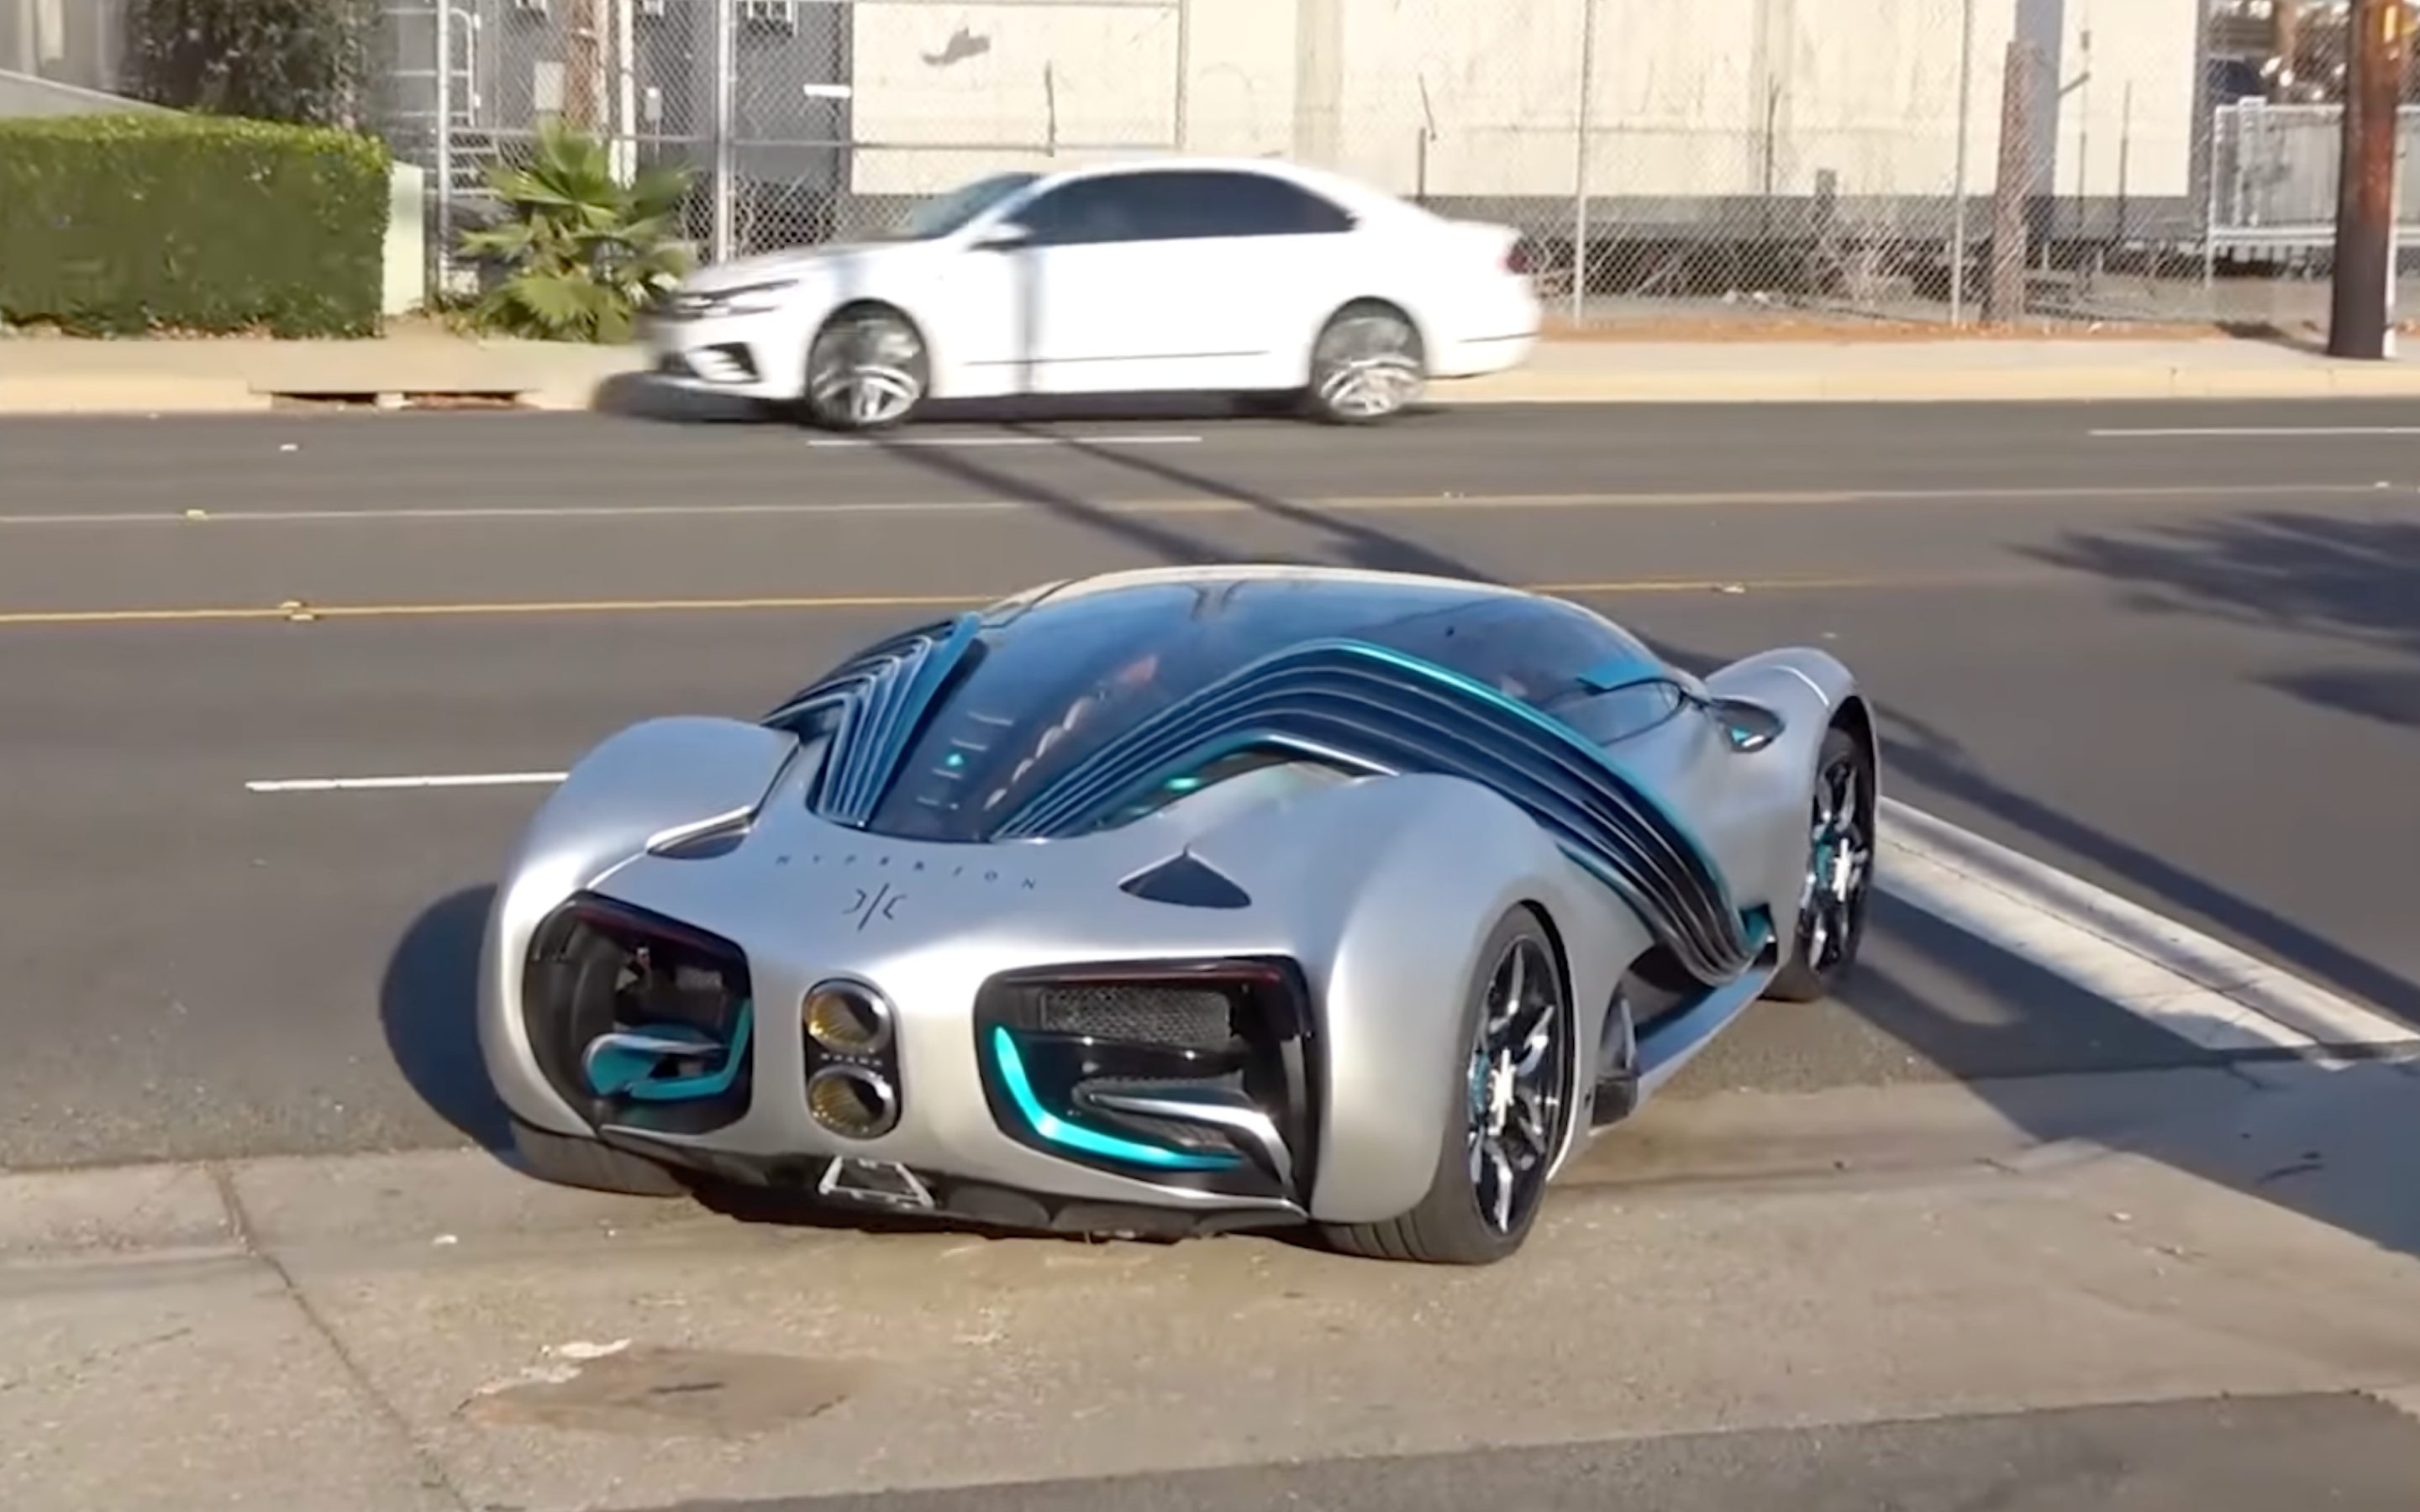 Silver Hyperion XP-1 Driven On To The Street